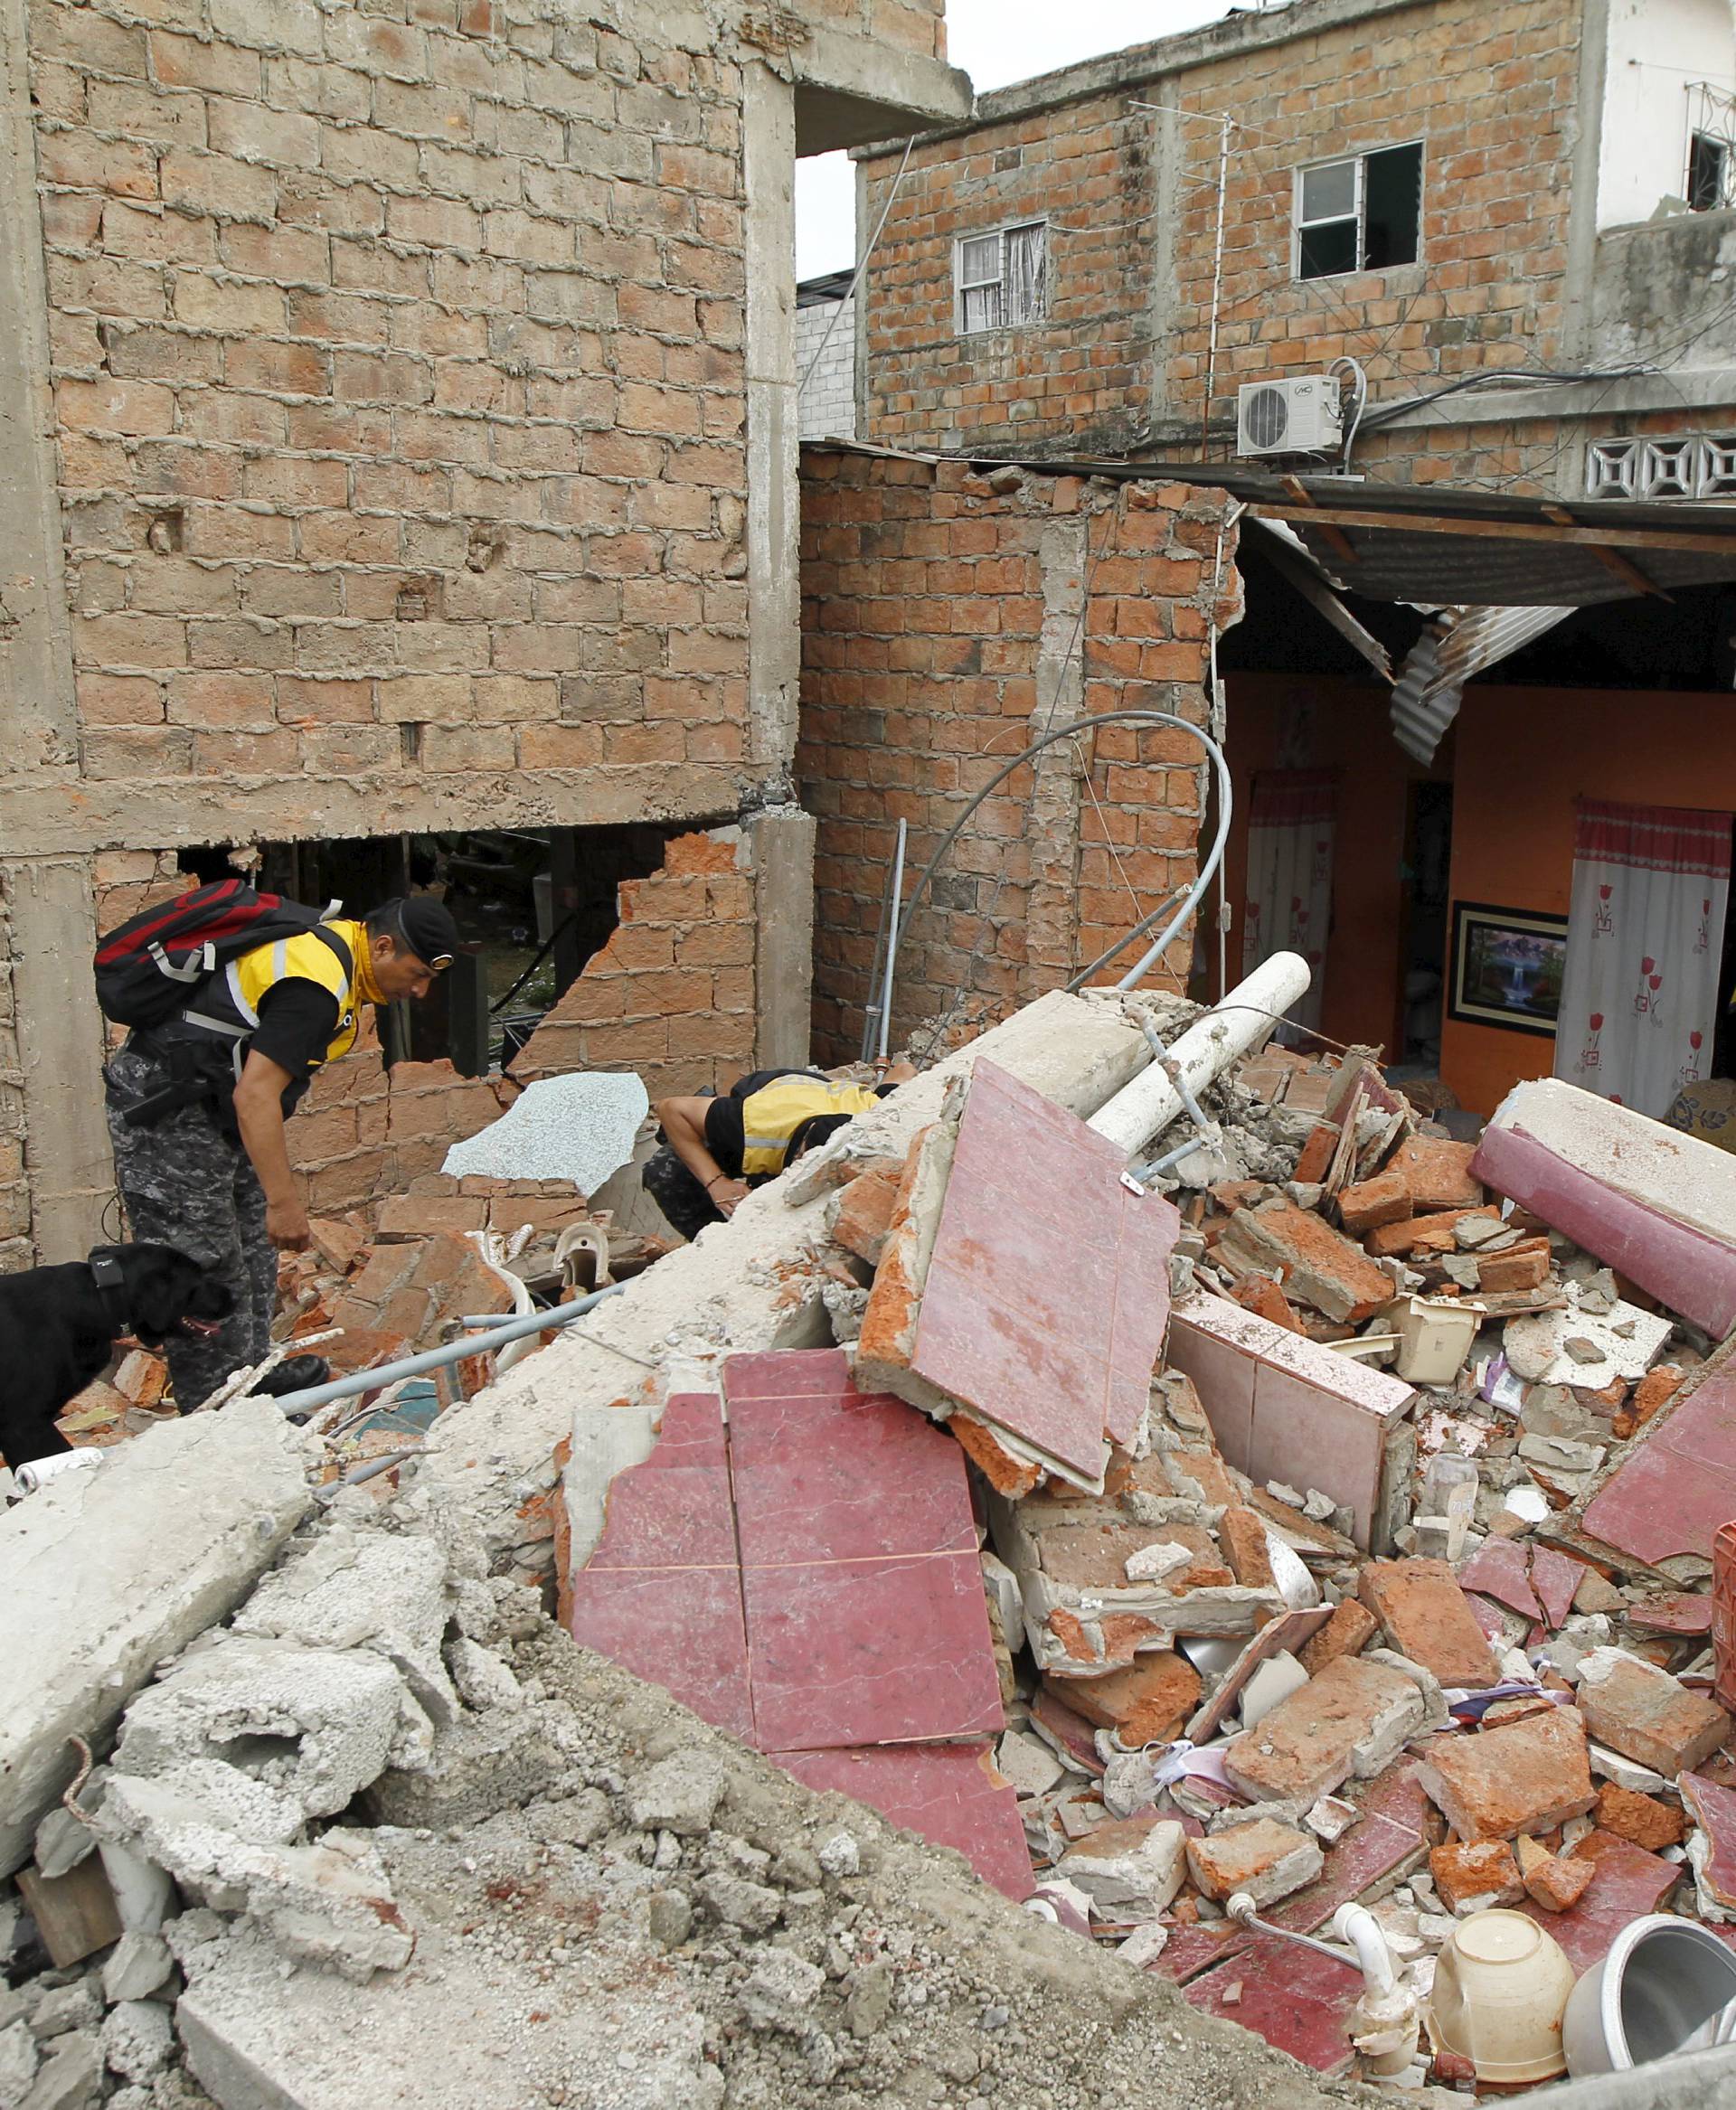 Police officers search through debris after an earthquake struck off Ecuador's Pacific coast, at Tarqui neighborhood in Manta